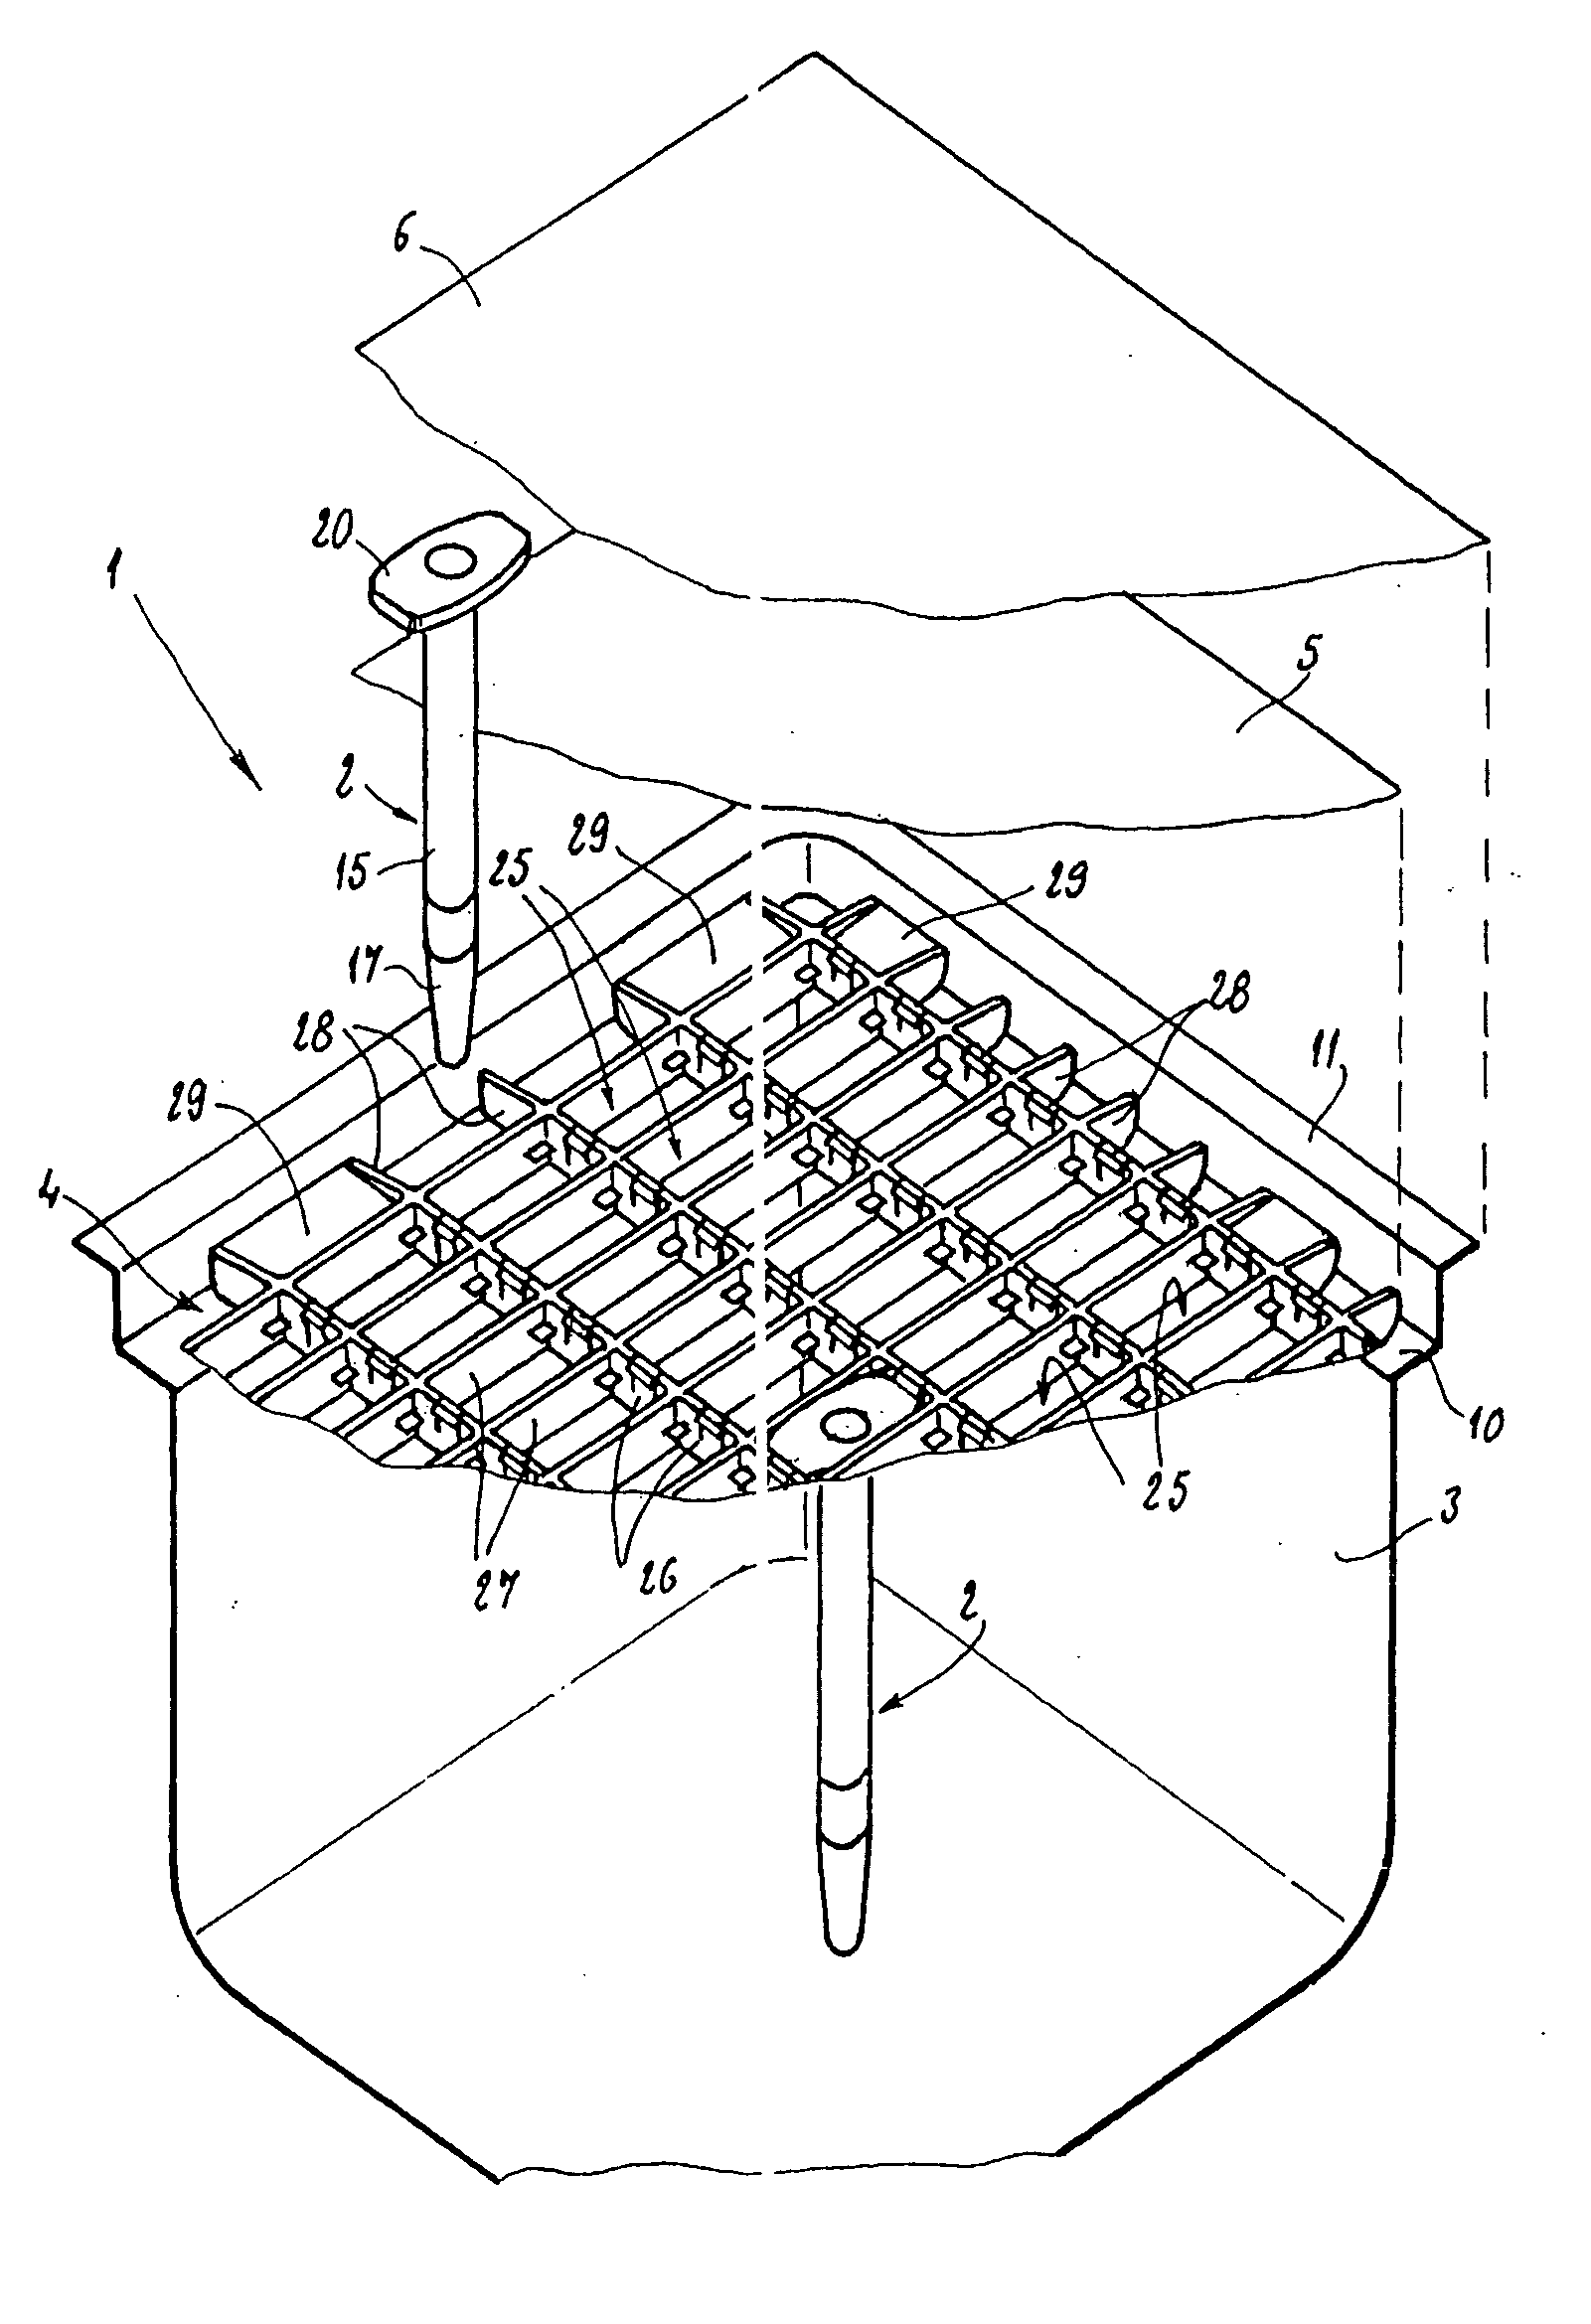 Plate for holding a group of syringe body objects